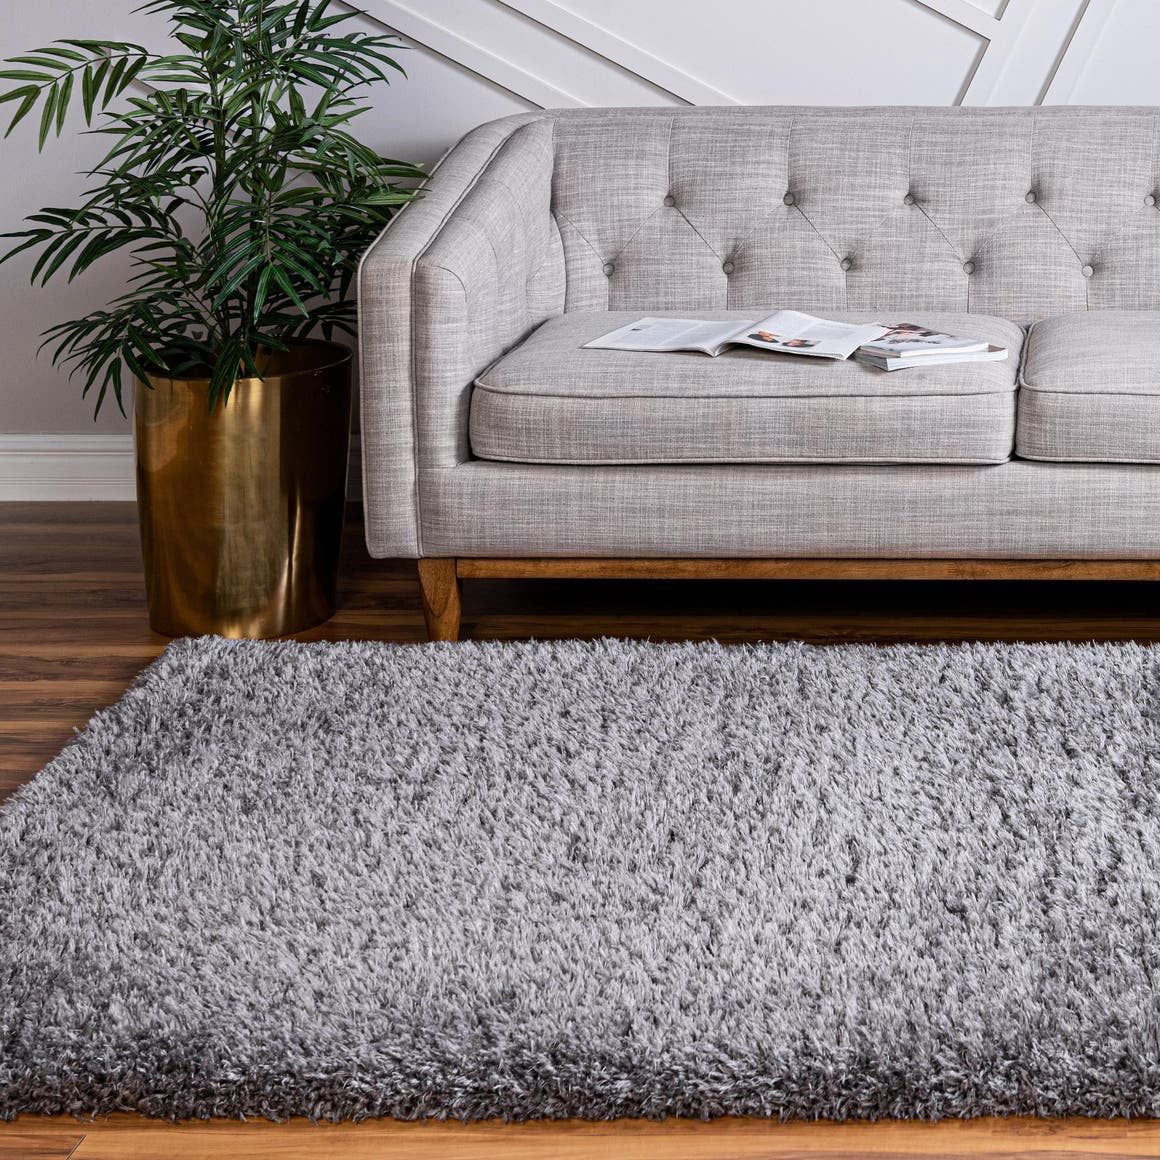 Infinity Collection Solid Shag Area Rugrugs ‚Äì Smoke 5' X 8'  High Pile Plush Shag Rug Perfect For Living Rooms, Bedrooms, Dining Rooms  And More – Walmart Throughout Ash Infinity Shag Rugs (Photo 1 of 15)